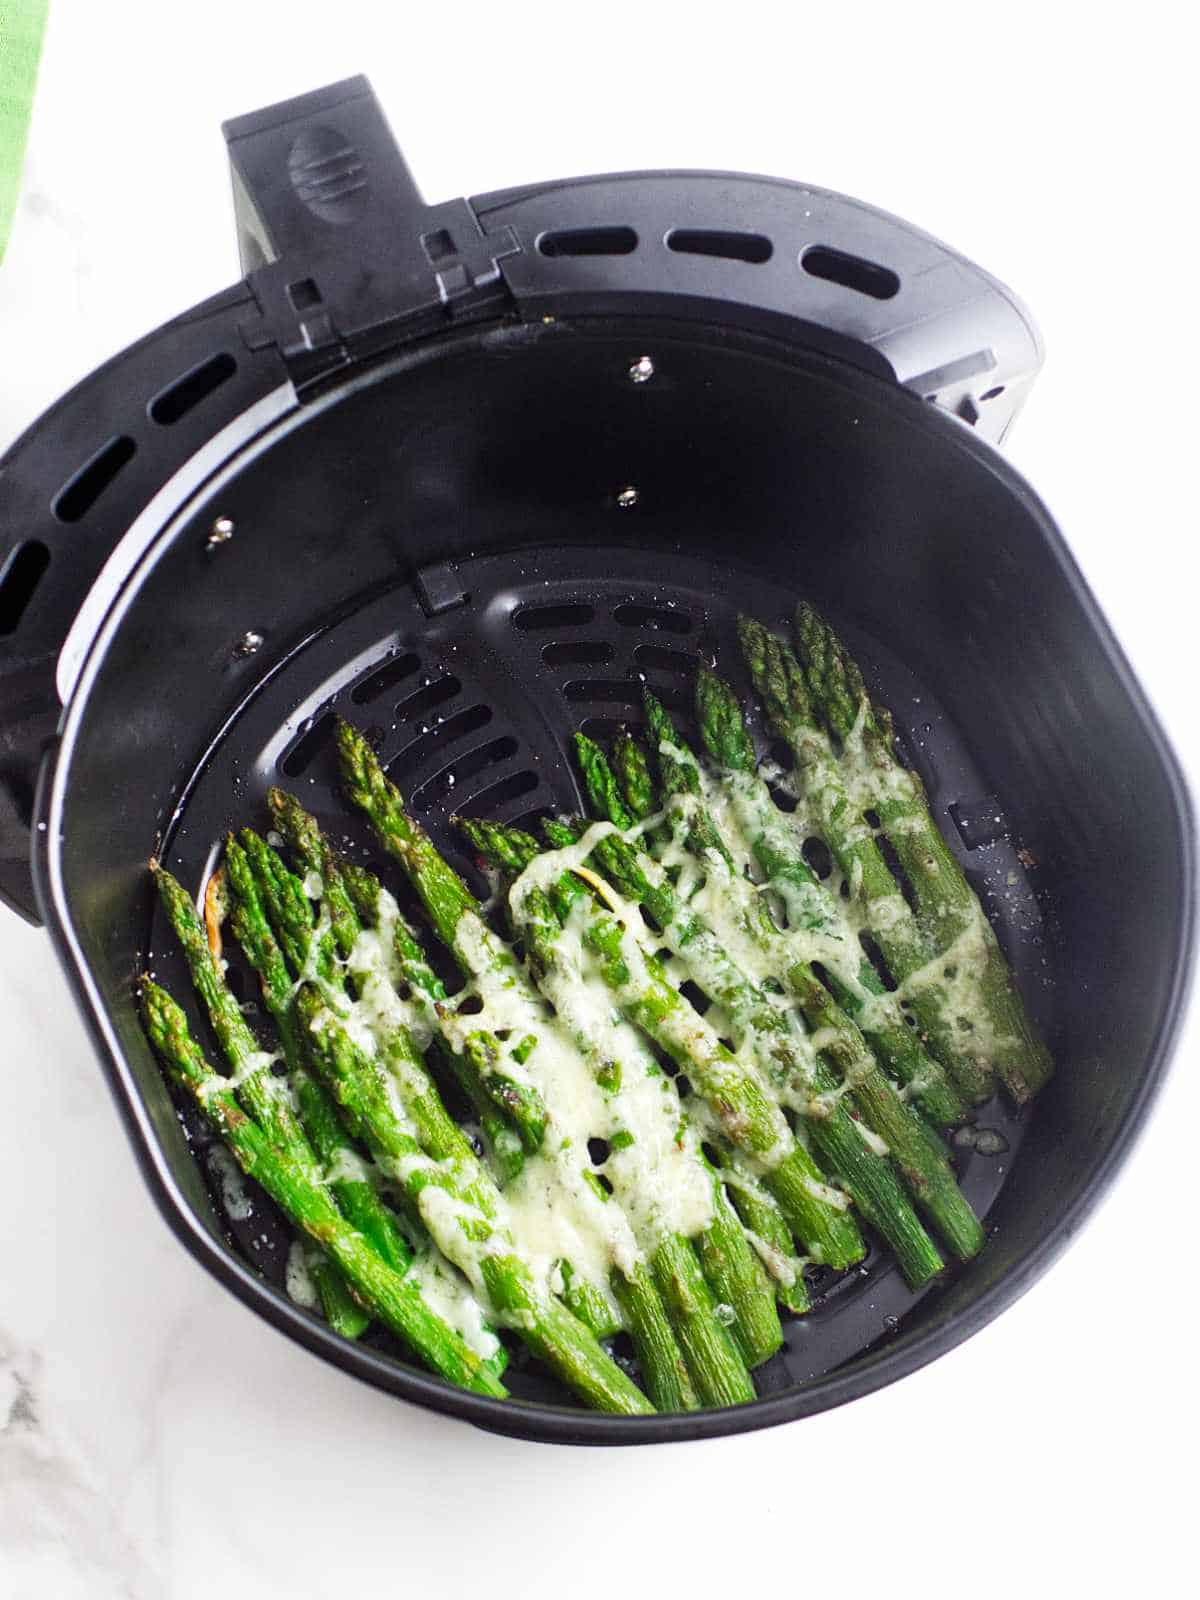 Air fryer basket with melted cheese on hot asparagus.